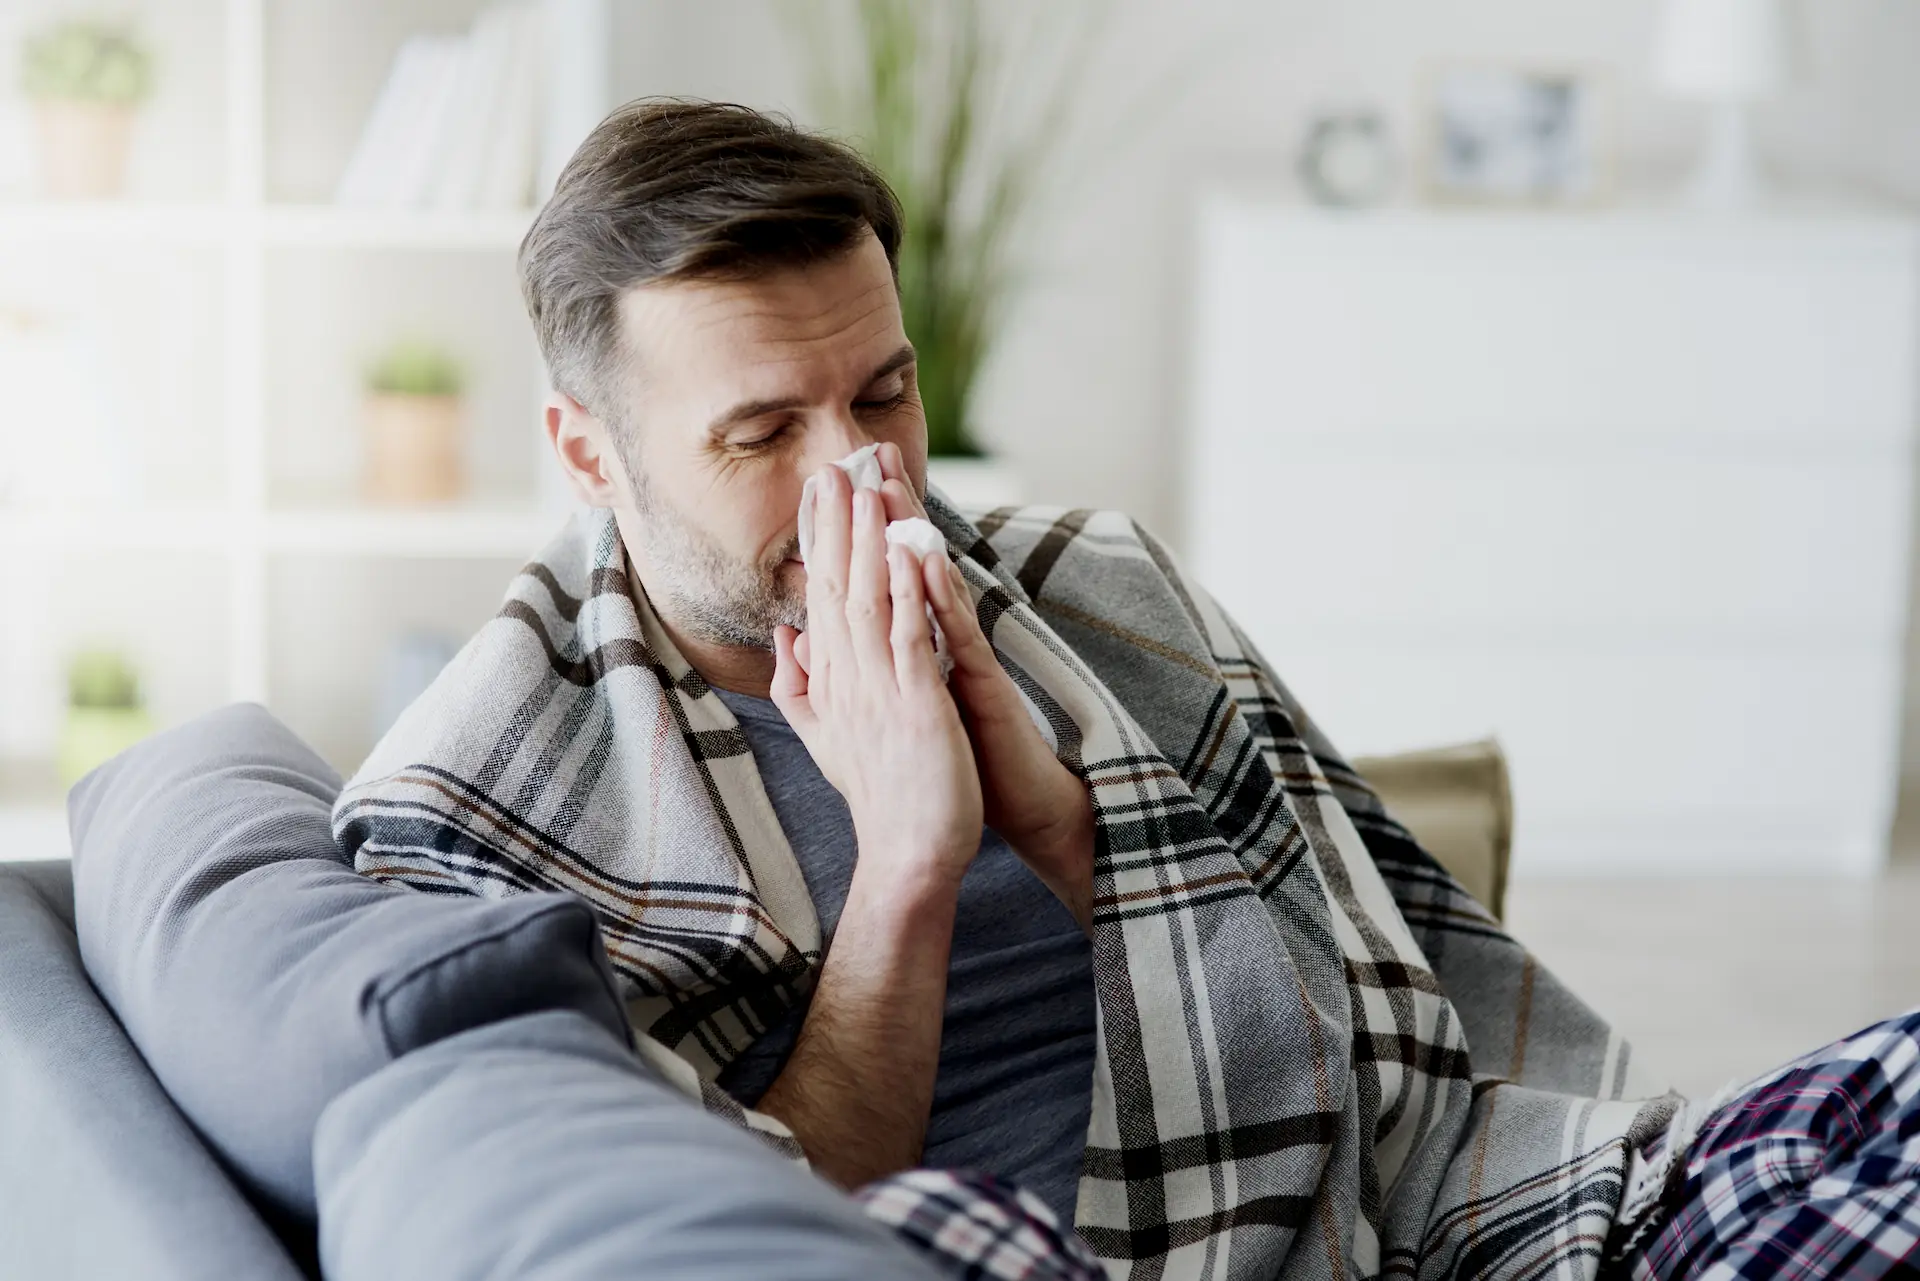 Medium shot of a person seated on a couch under a blanket blowing their nose. A sauna's infrared heat stimulates the cells in such a way that helps combat viruses. That's why sauna use is good for your immune system.